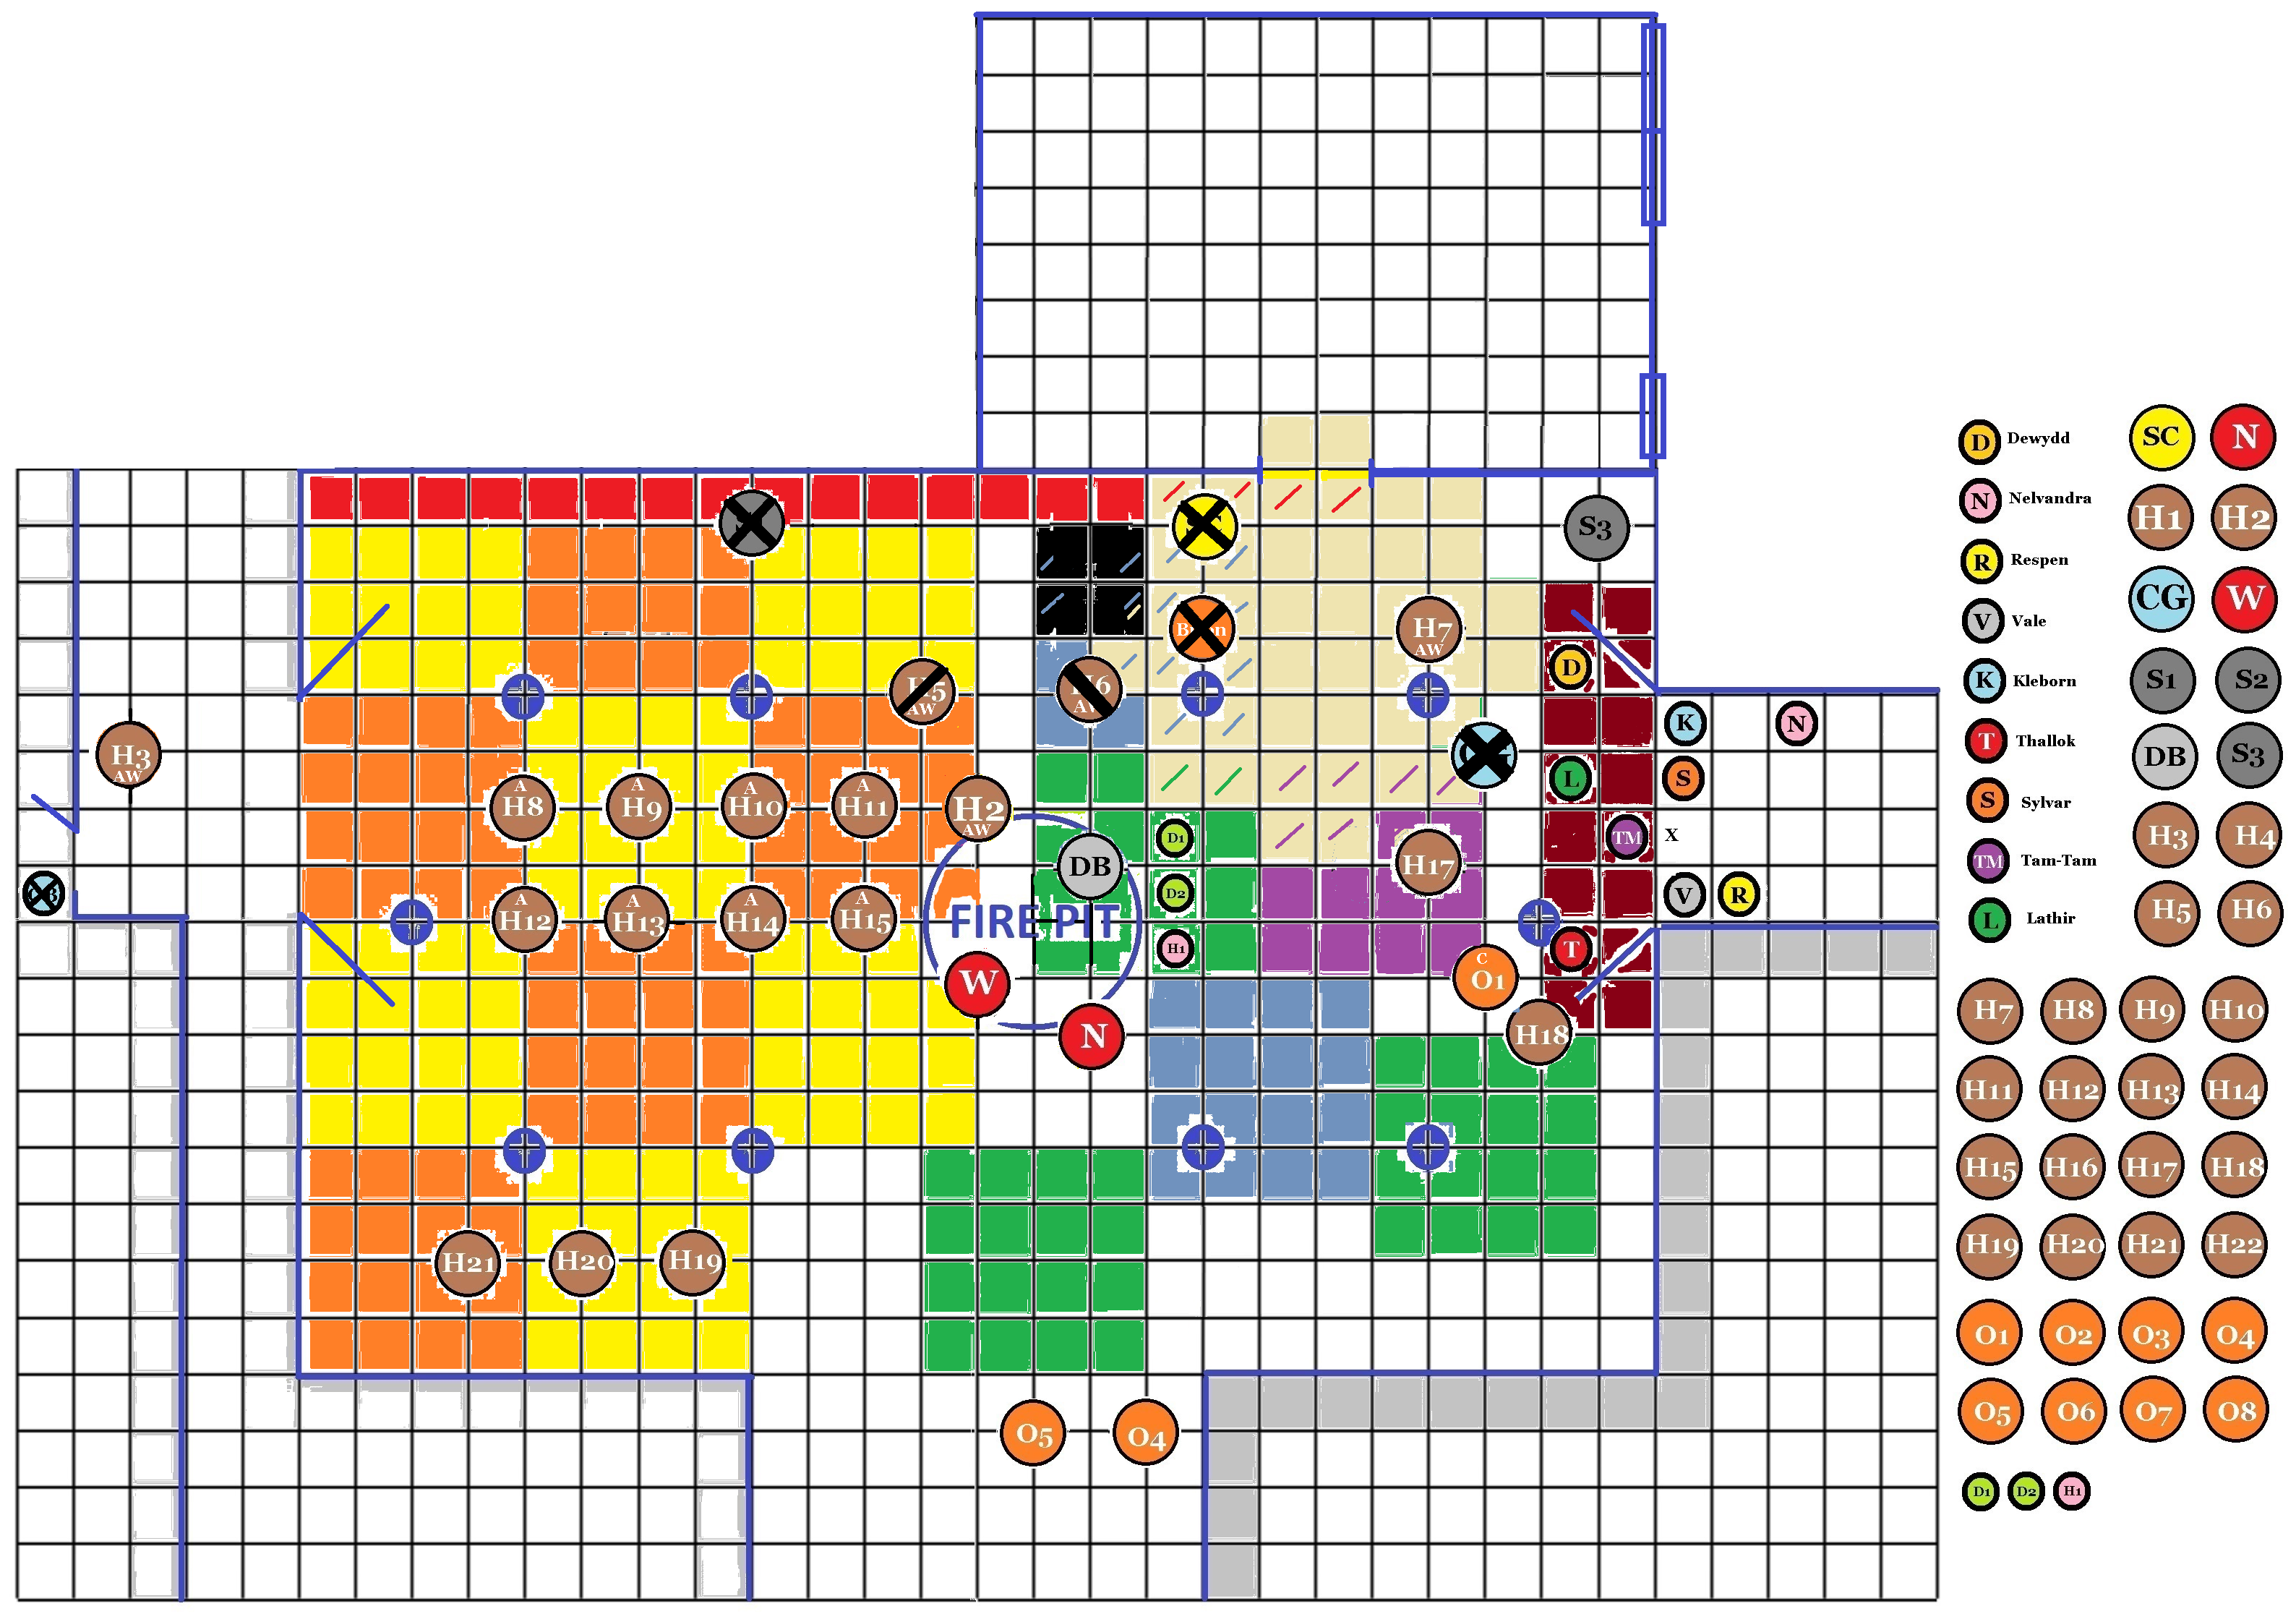 00-Big-Battle-Map-Giant-Great-Hall-001k7.png